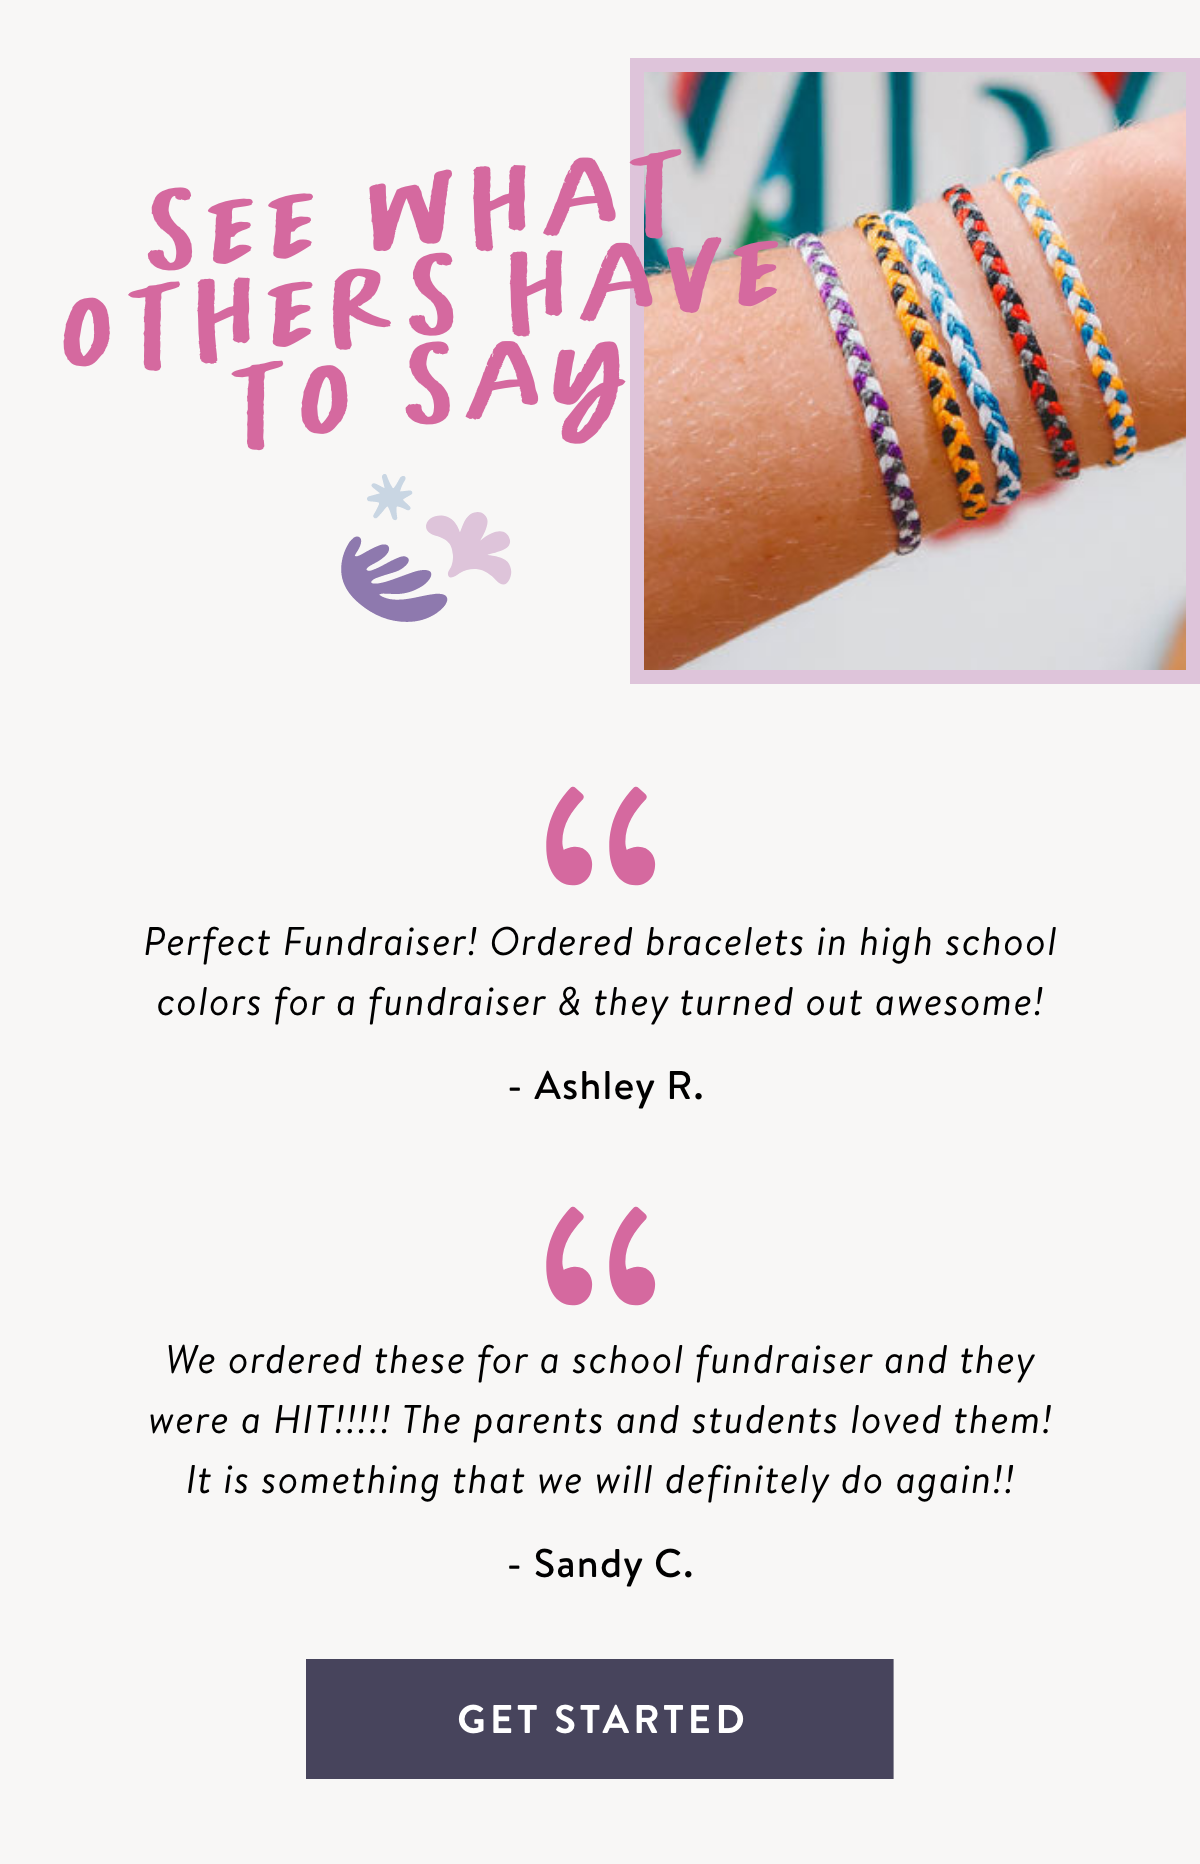 Introducing: The Sibling Support Bracelet! – Sibling Support Project